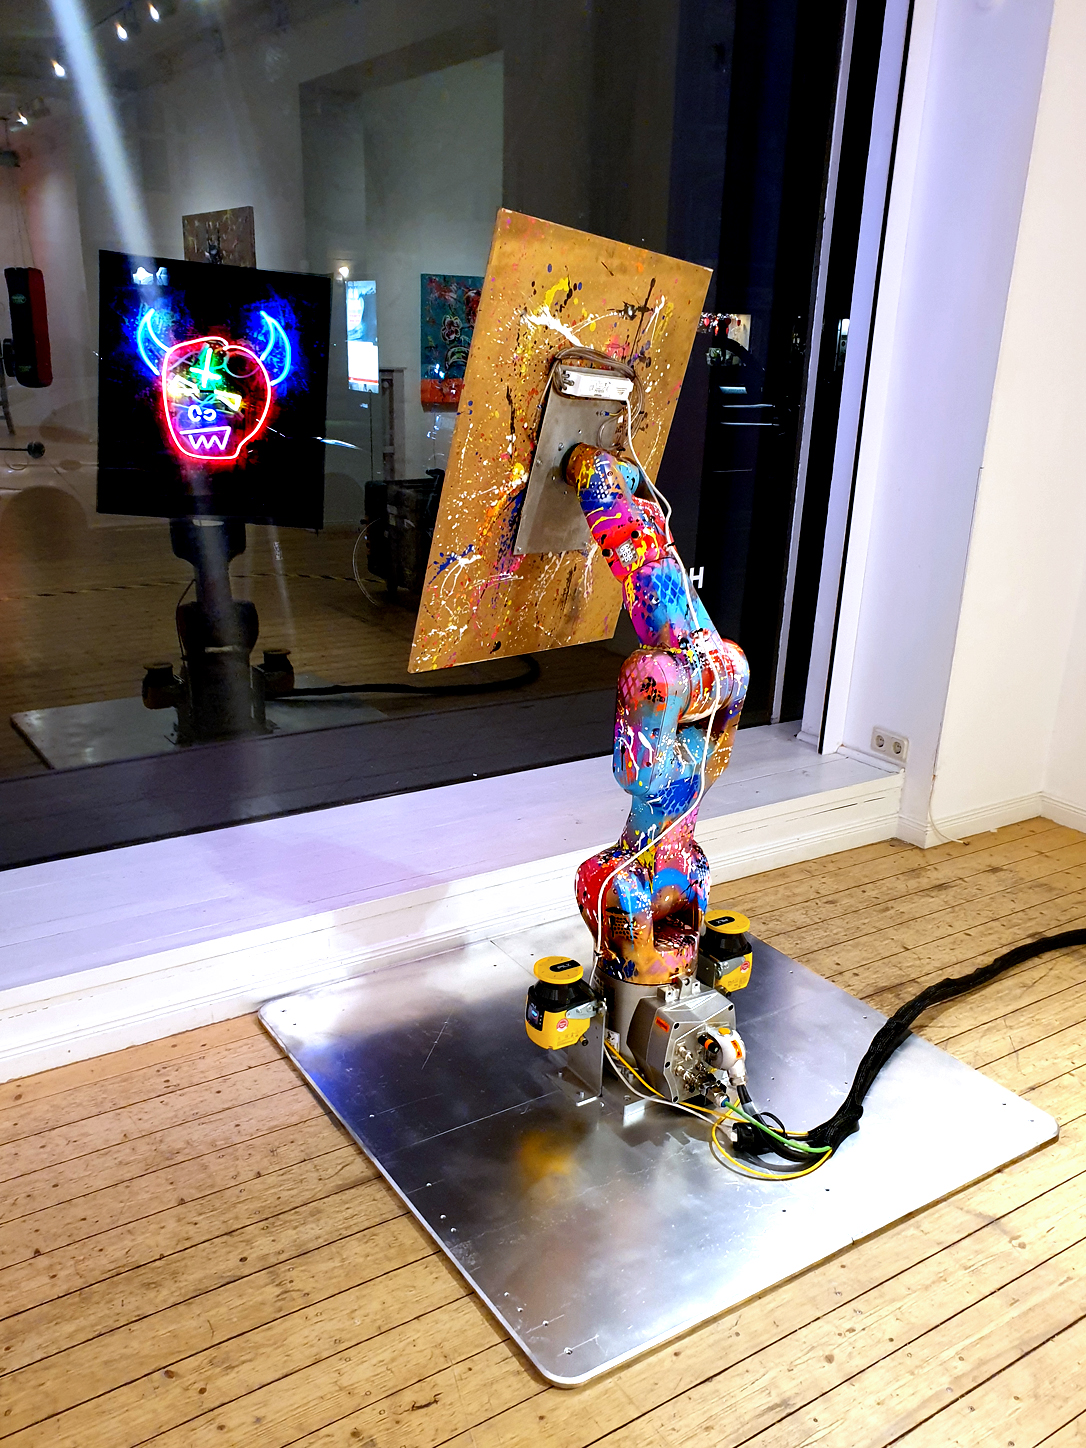  MARC JUNG X MEHNERT LAB COLLBORATION 2021 // SYMPATHY FOR THE DEVIL 2, mixed media and neon light on wood (golden background), 80x70x6cm X KUKA ROBOTER, programmable and moveable in the room